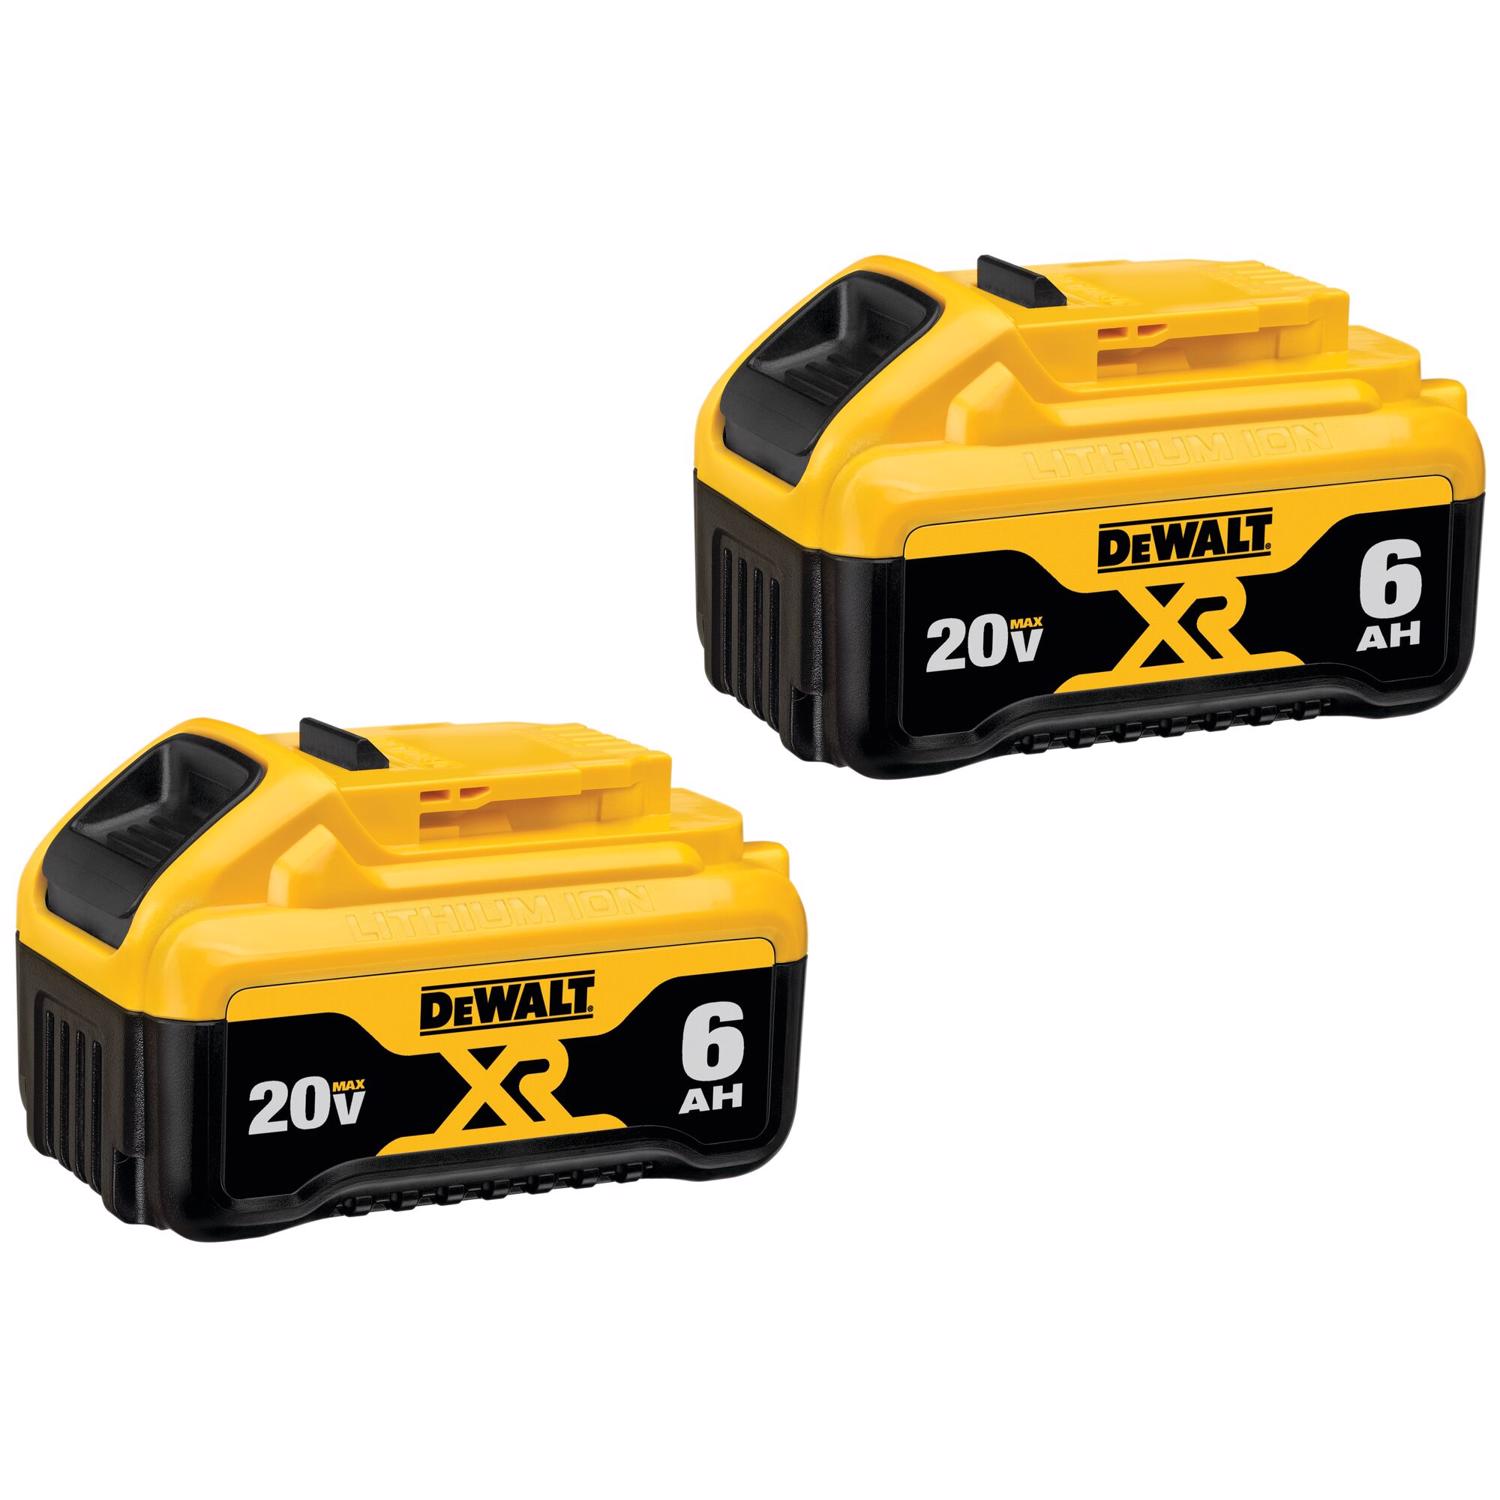 Photos - Power Tool Battery DeWALT 20V MAX DCB206-2 6 Ah Lithium-Ion Battery Combo Pack 2 pc 